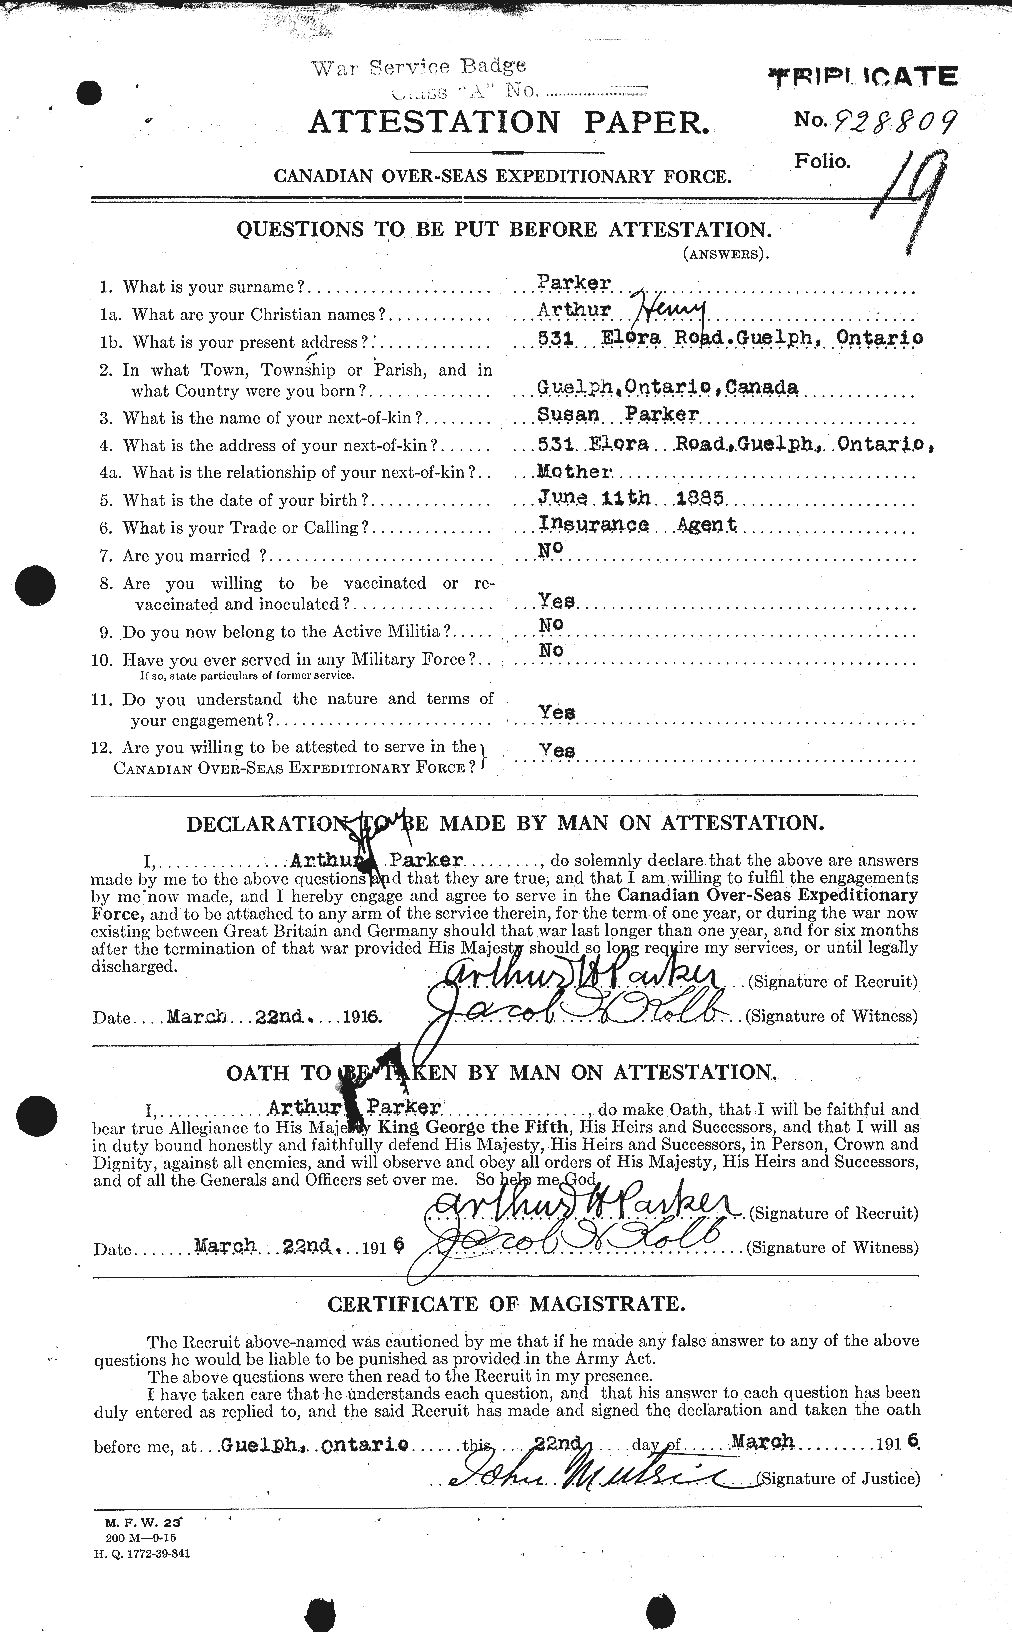 Personnel Records of the First World War - CEF 565026a